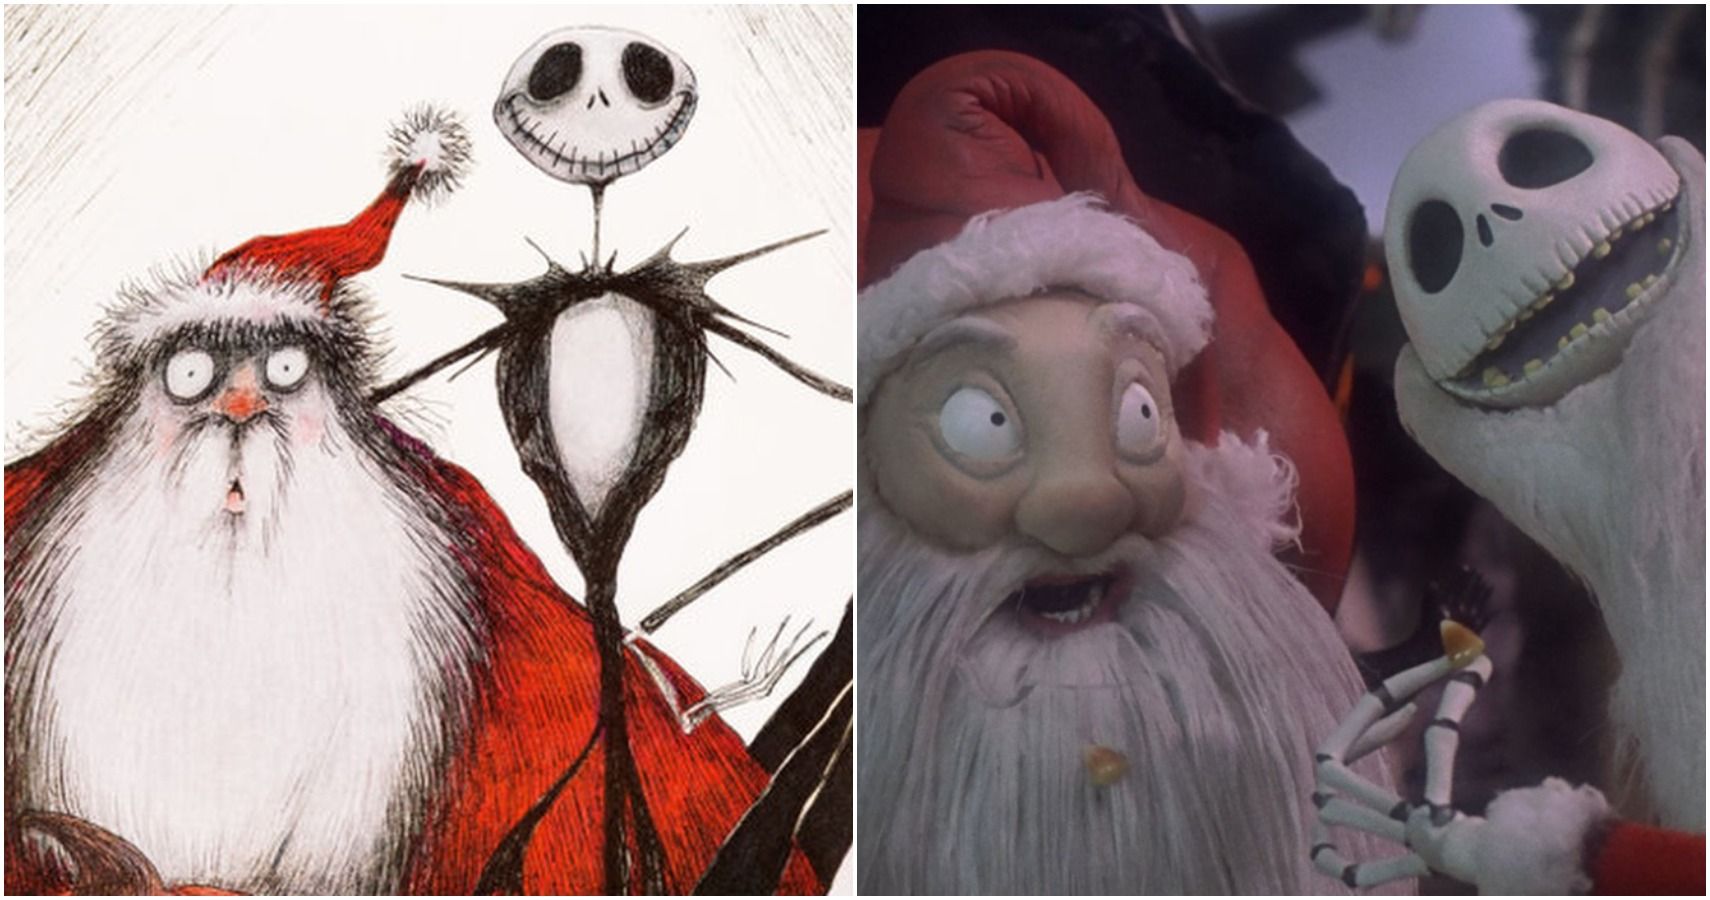 The Nightmare Before Christmas [Book]